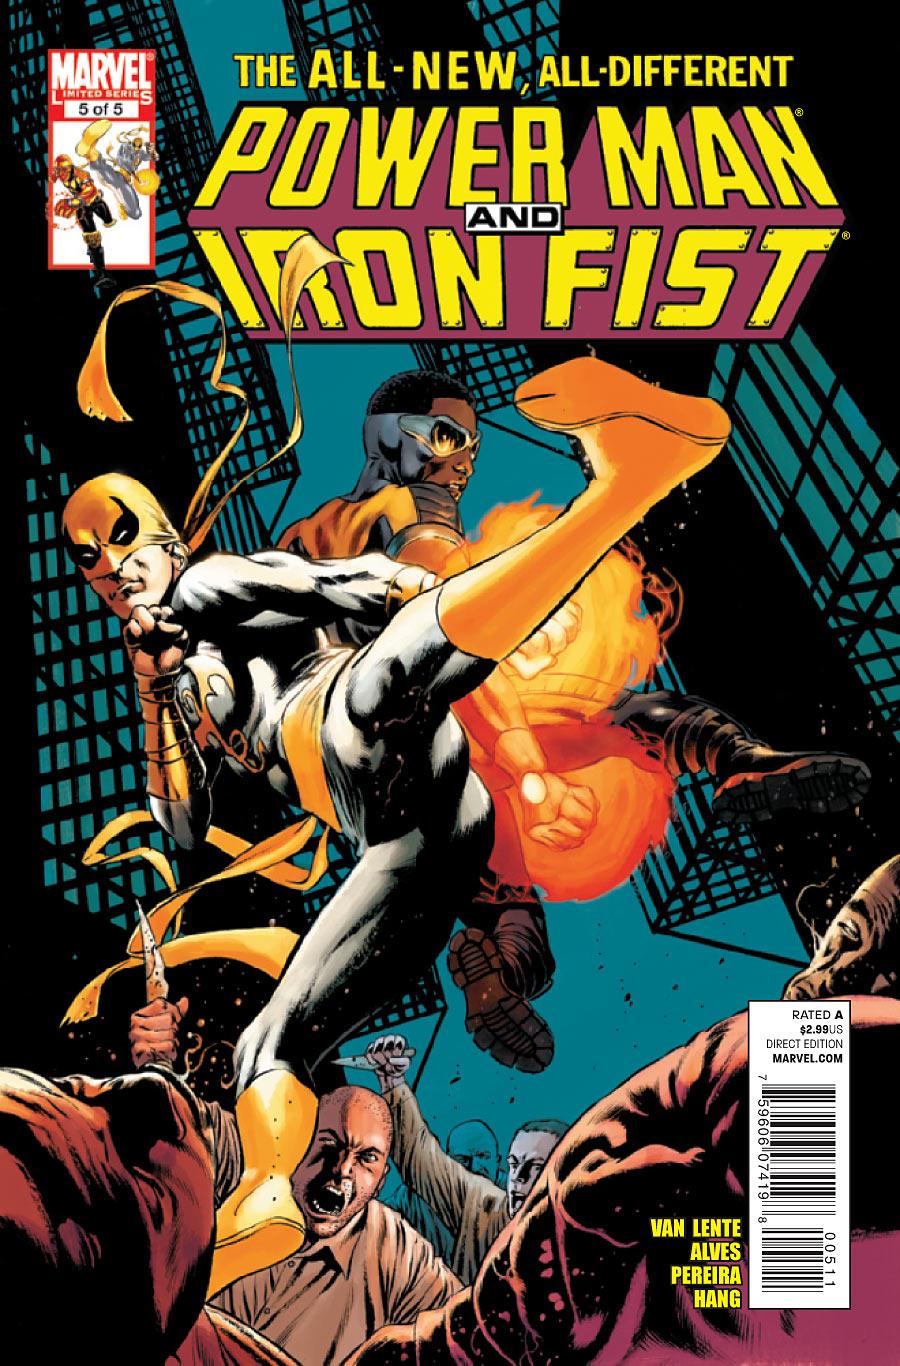 Power Man and Iron Fist Vol. 2 #5